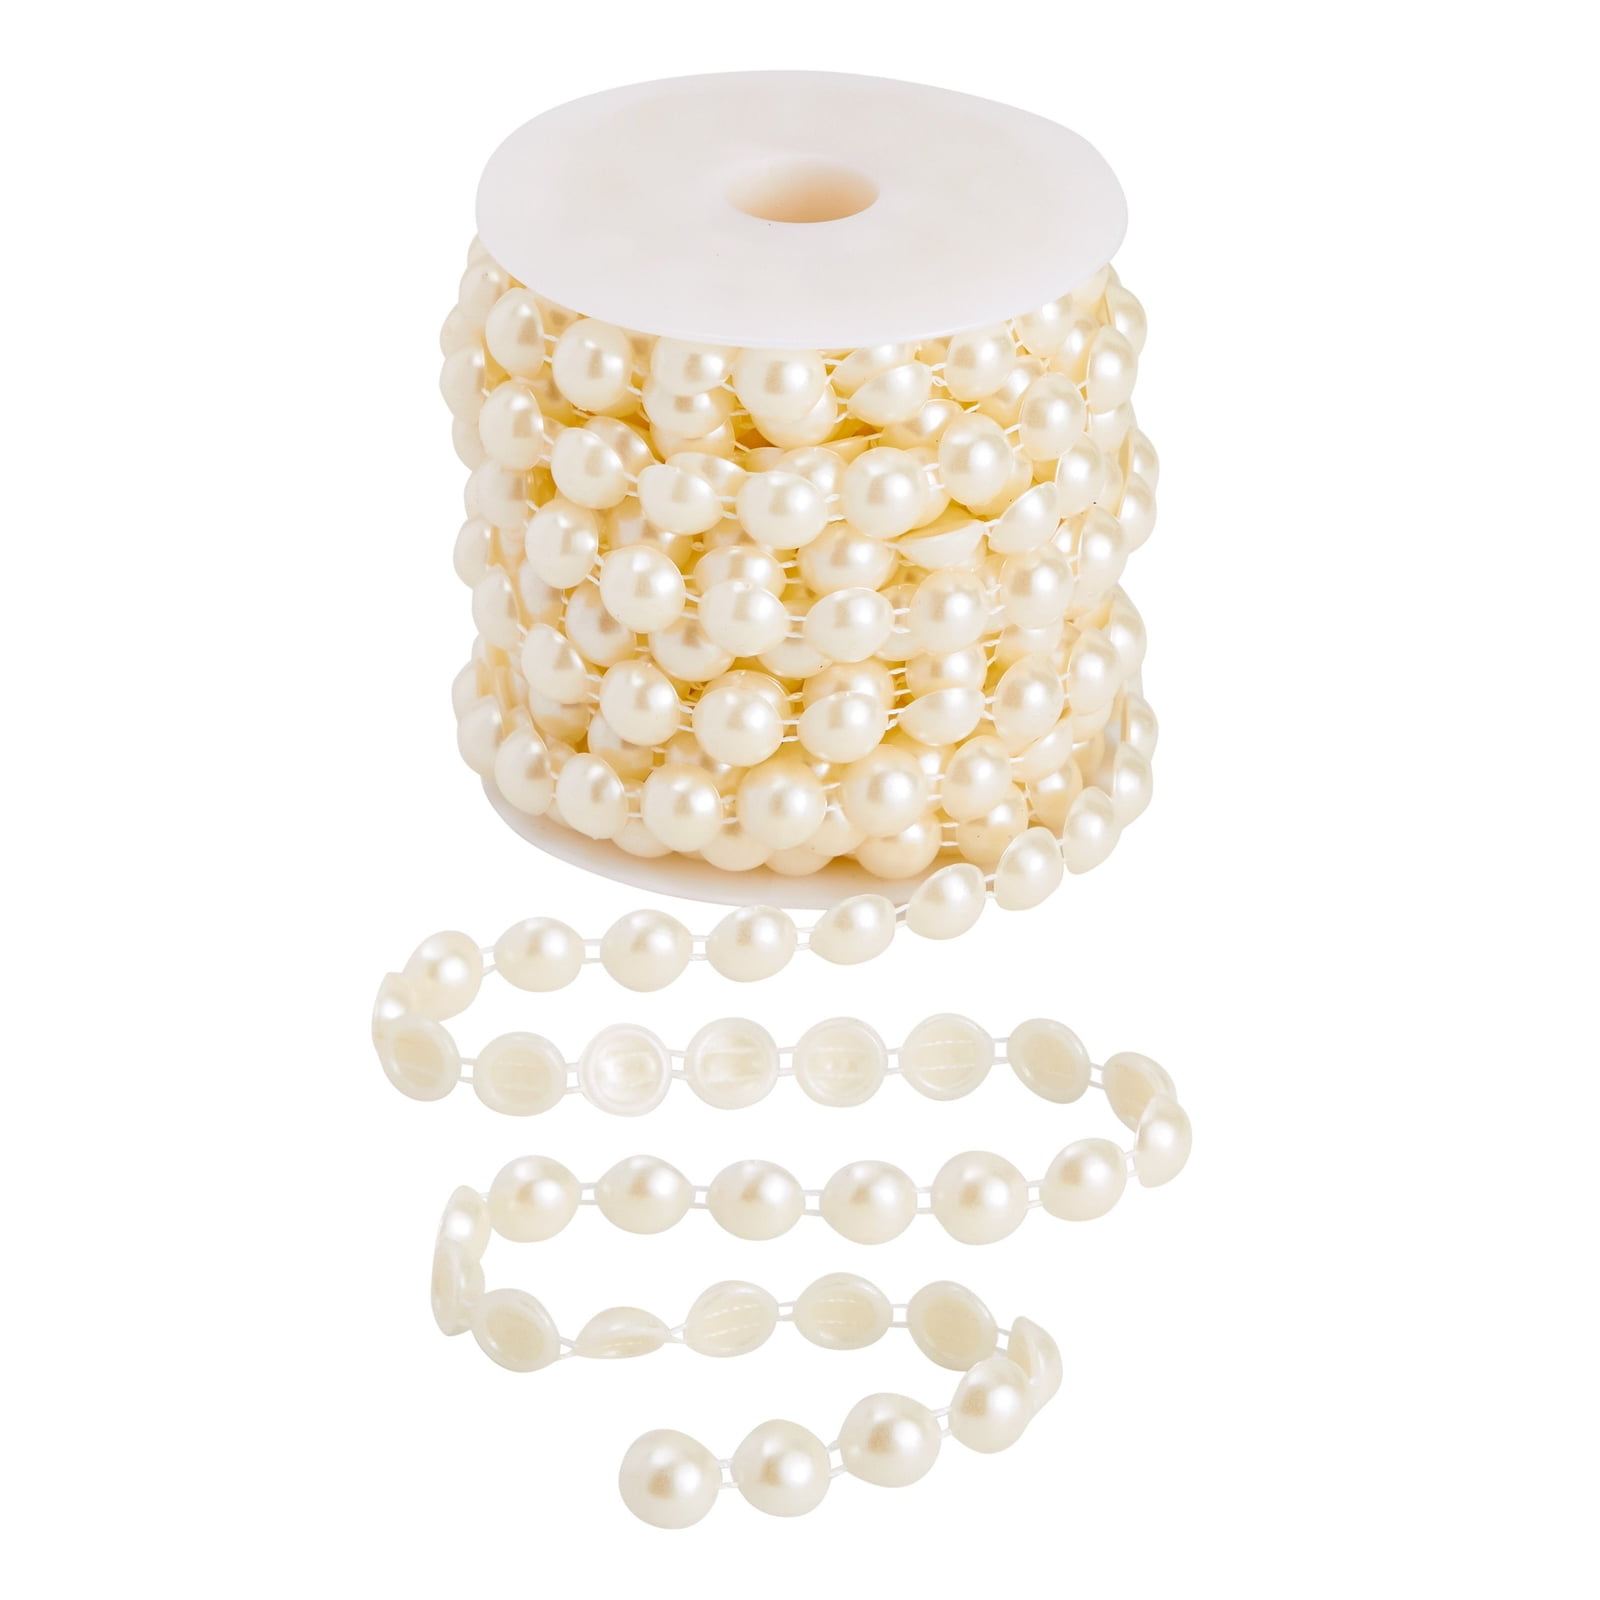 Cream Fused String Pearl Beads on Spools for Wedding Favors, Crafts,  Decorating & Displaying & More